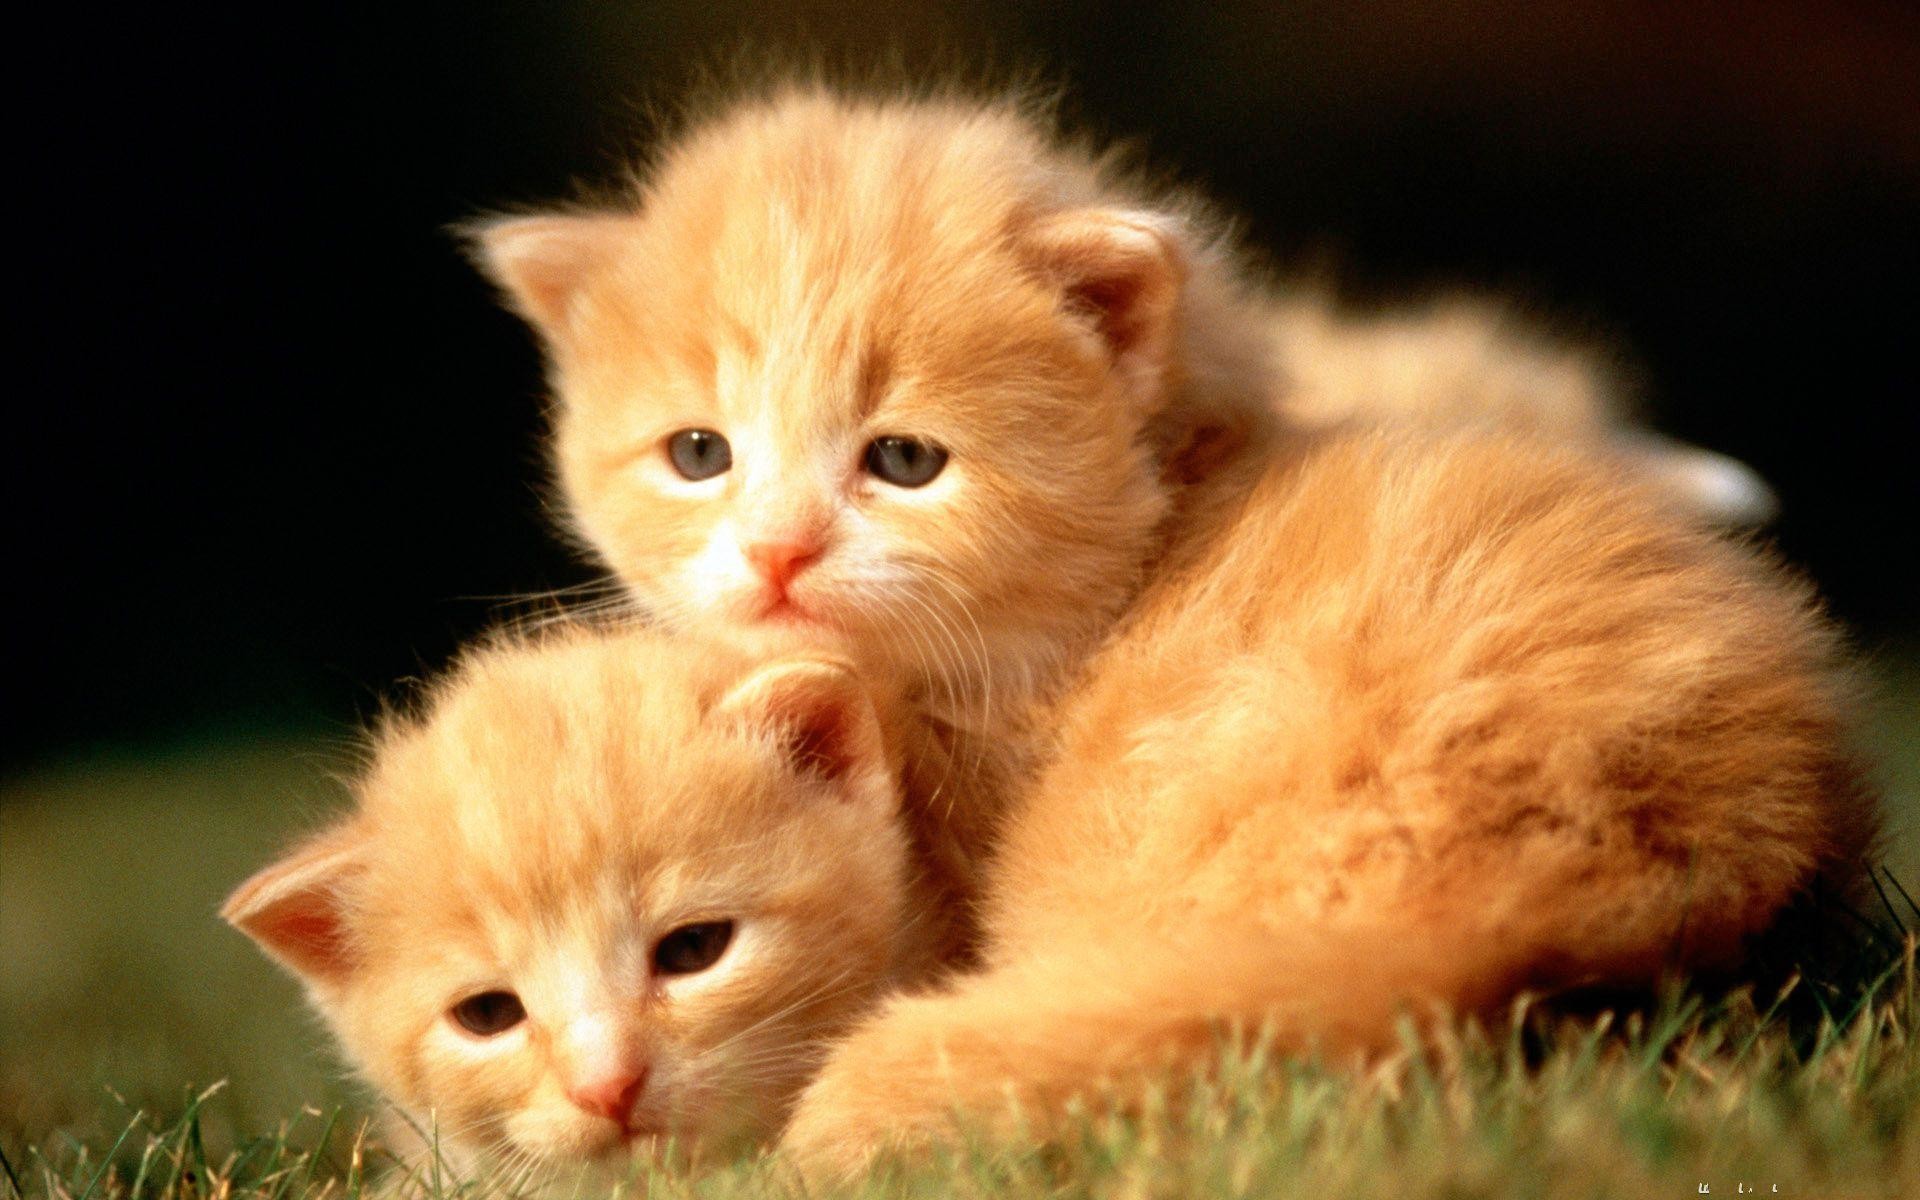 1920x1200 cute baby animal pictures wallpapers - HD Wallpapers 100% High Quality